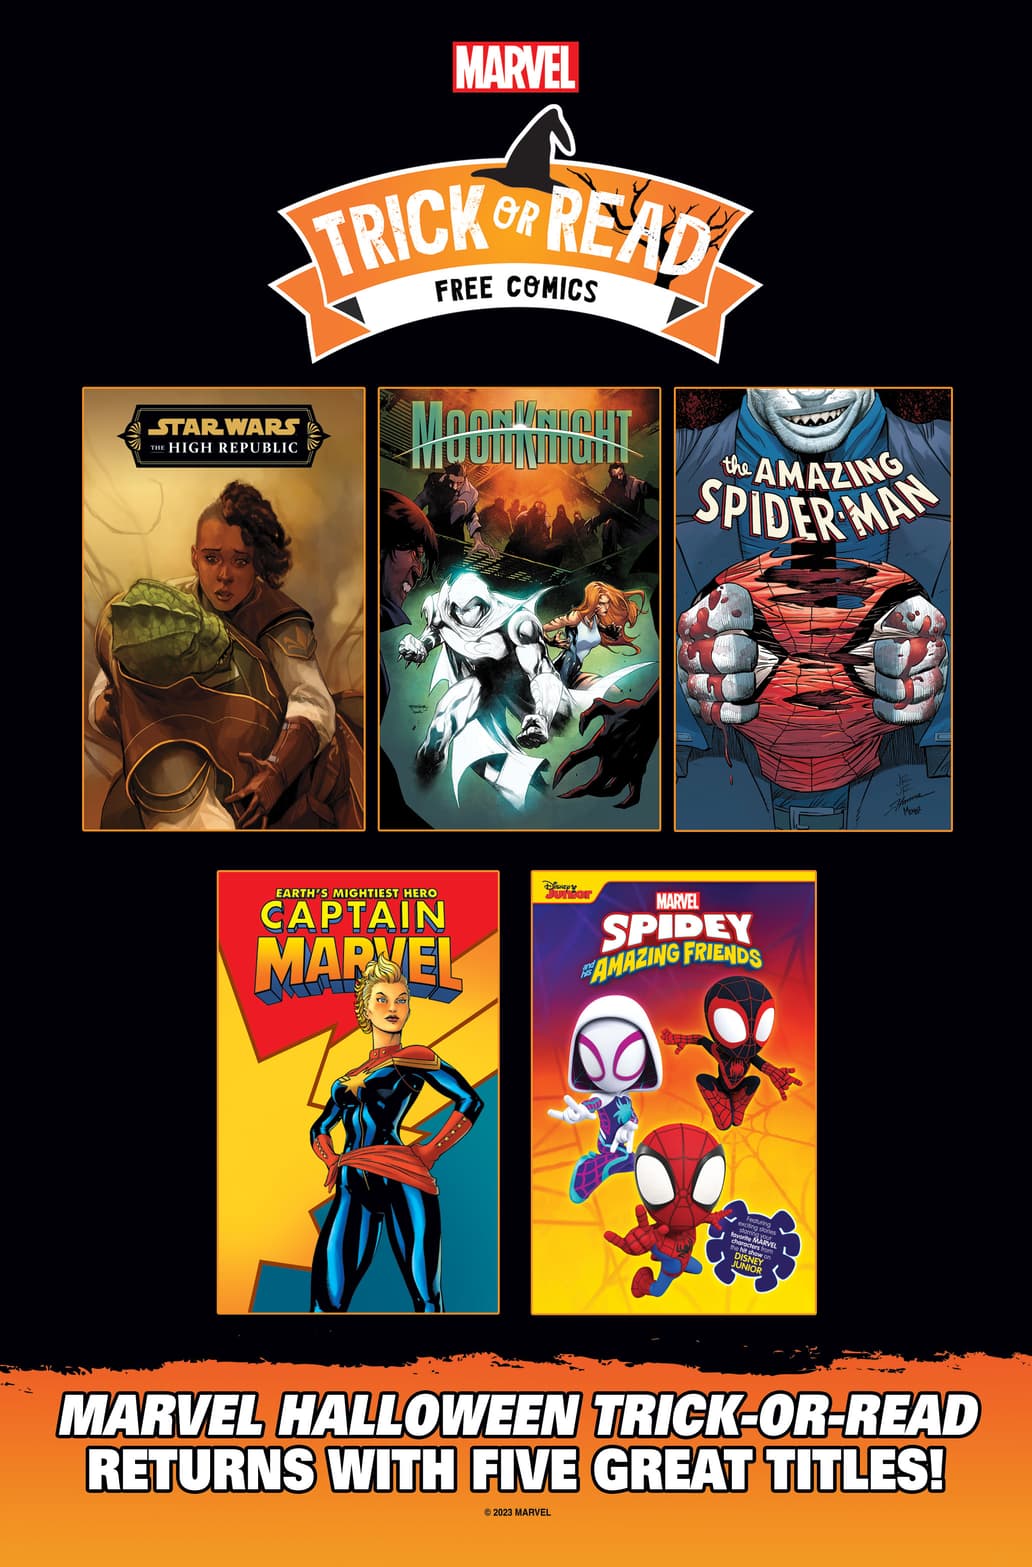 Marvel's Halloween Trick-or-Read Titles 2023